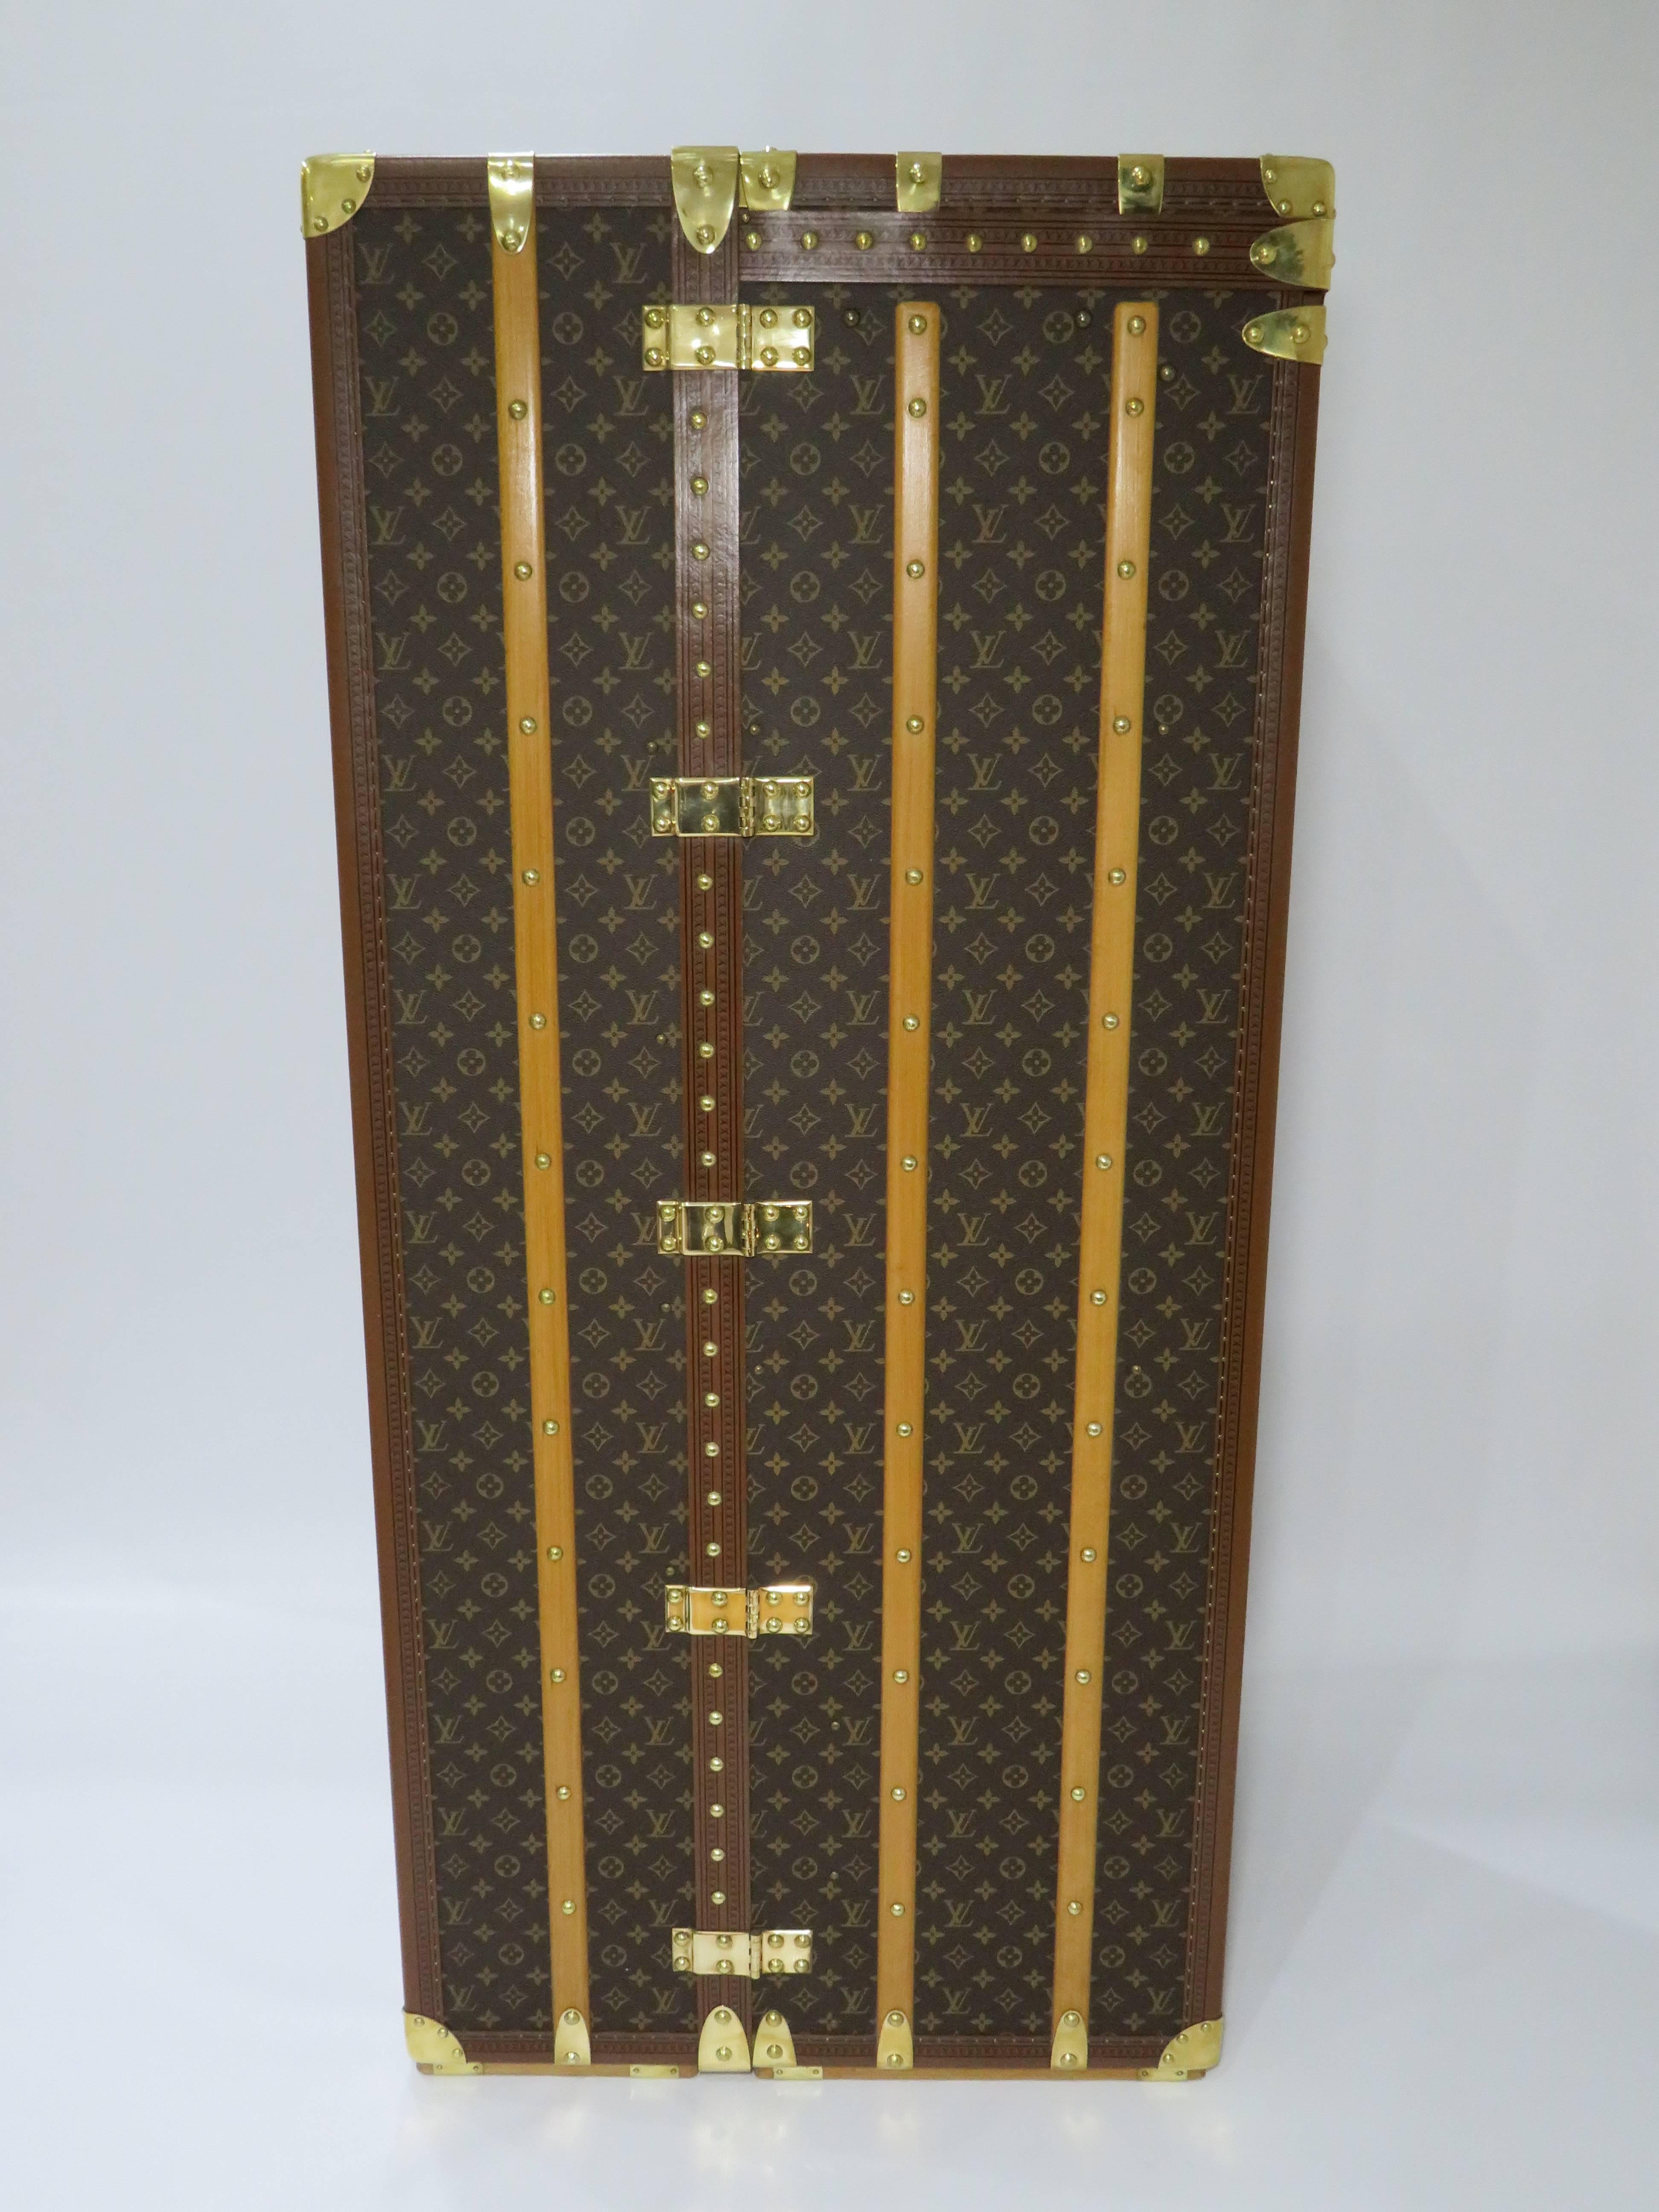 For sale a massive, custom ordered LV Queen wardrobe 143cm tall.
Exterior in immaculate condition, interior has some discoloration in places as seen on photos but again in perfect condition comes complete with all interior pieces. This wardrobe was